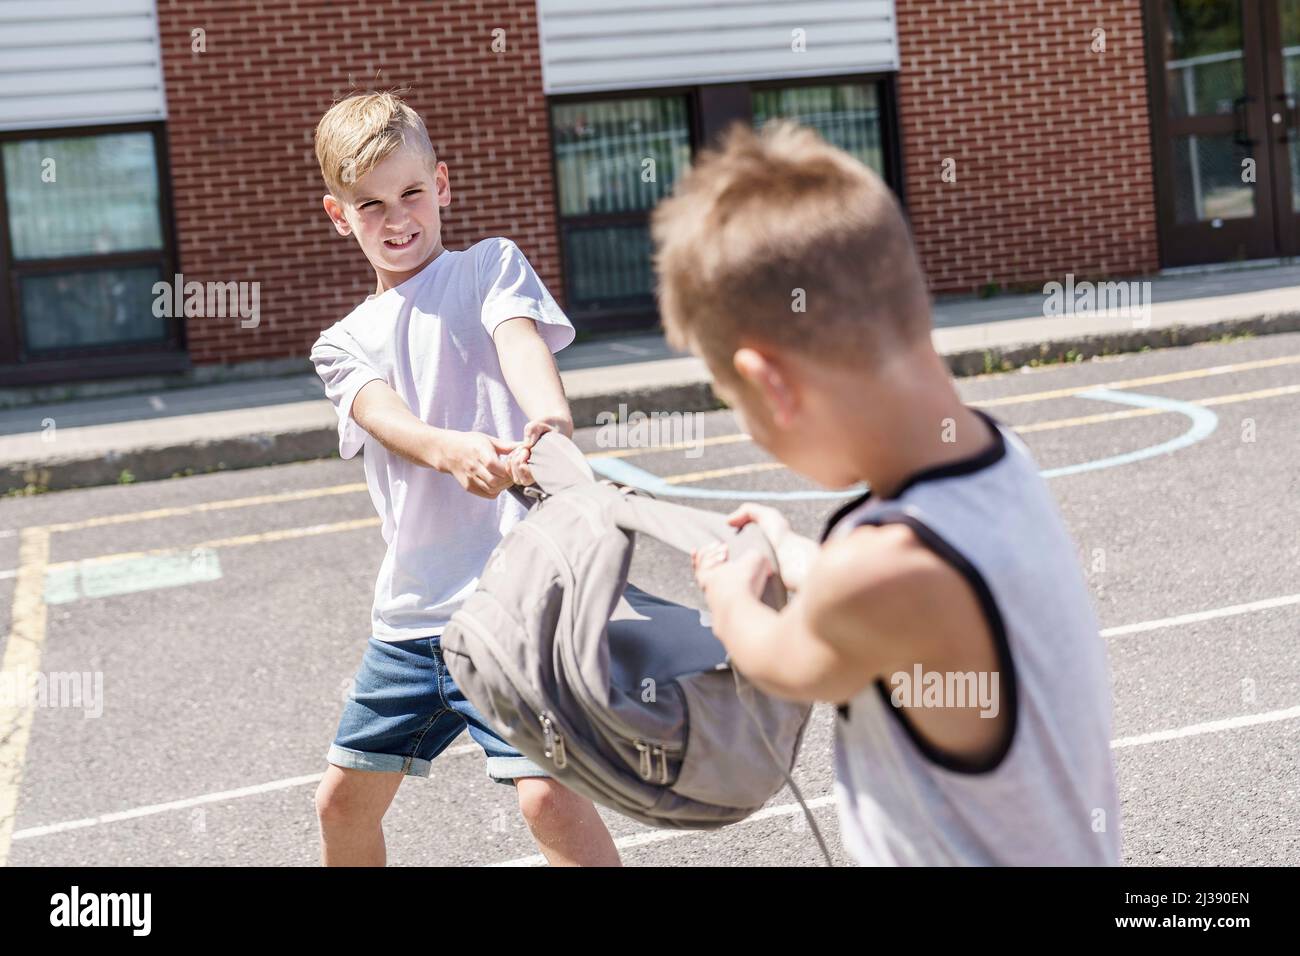 Cruel teenagers punching younger boy, physical intimidation, school bullying Stock Photo